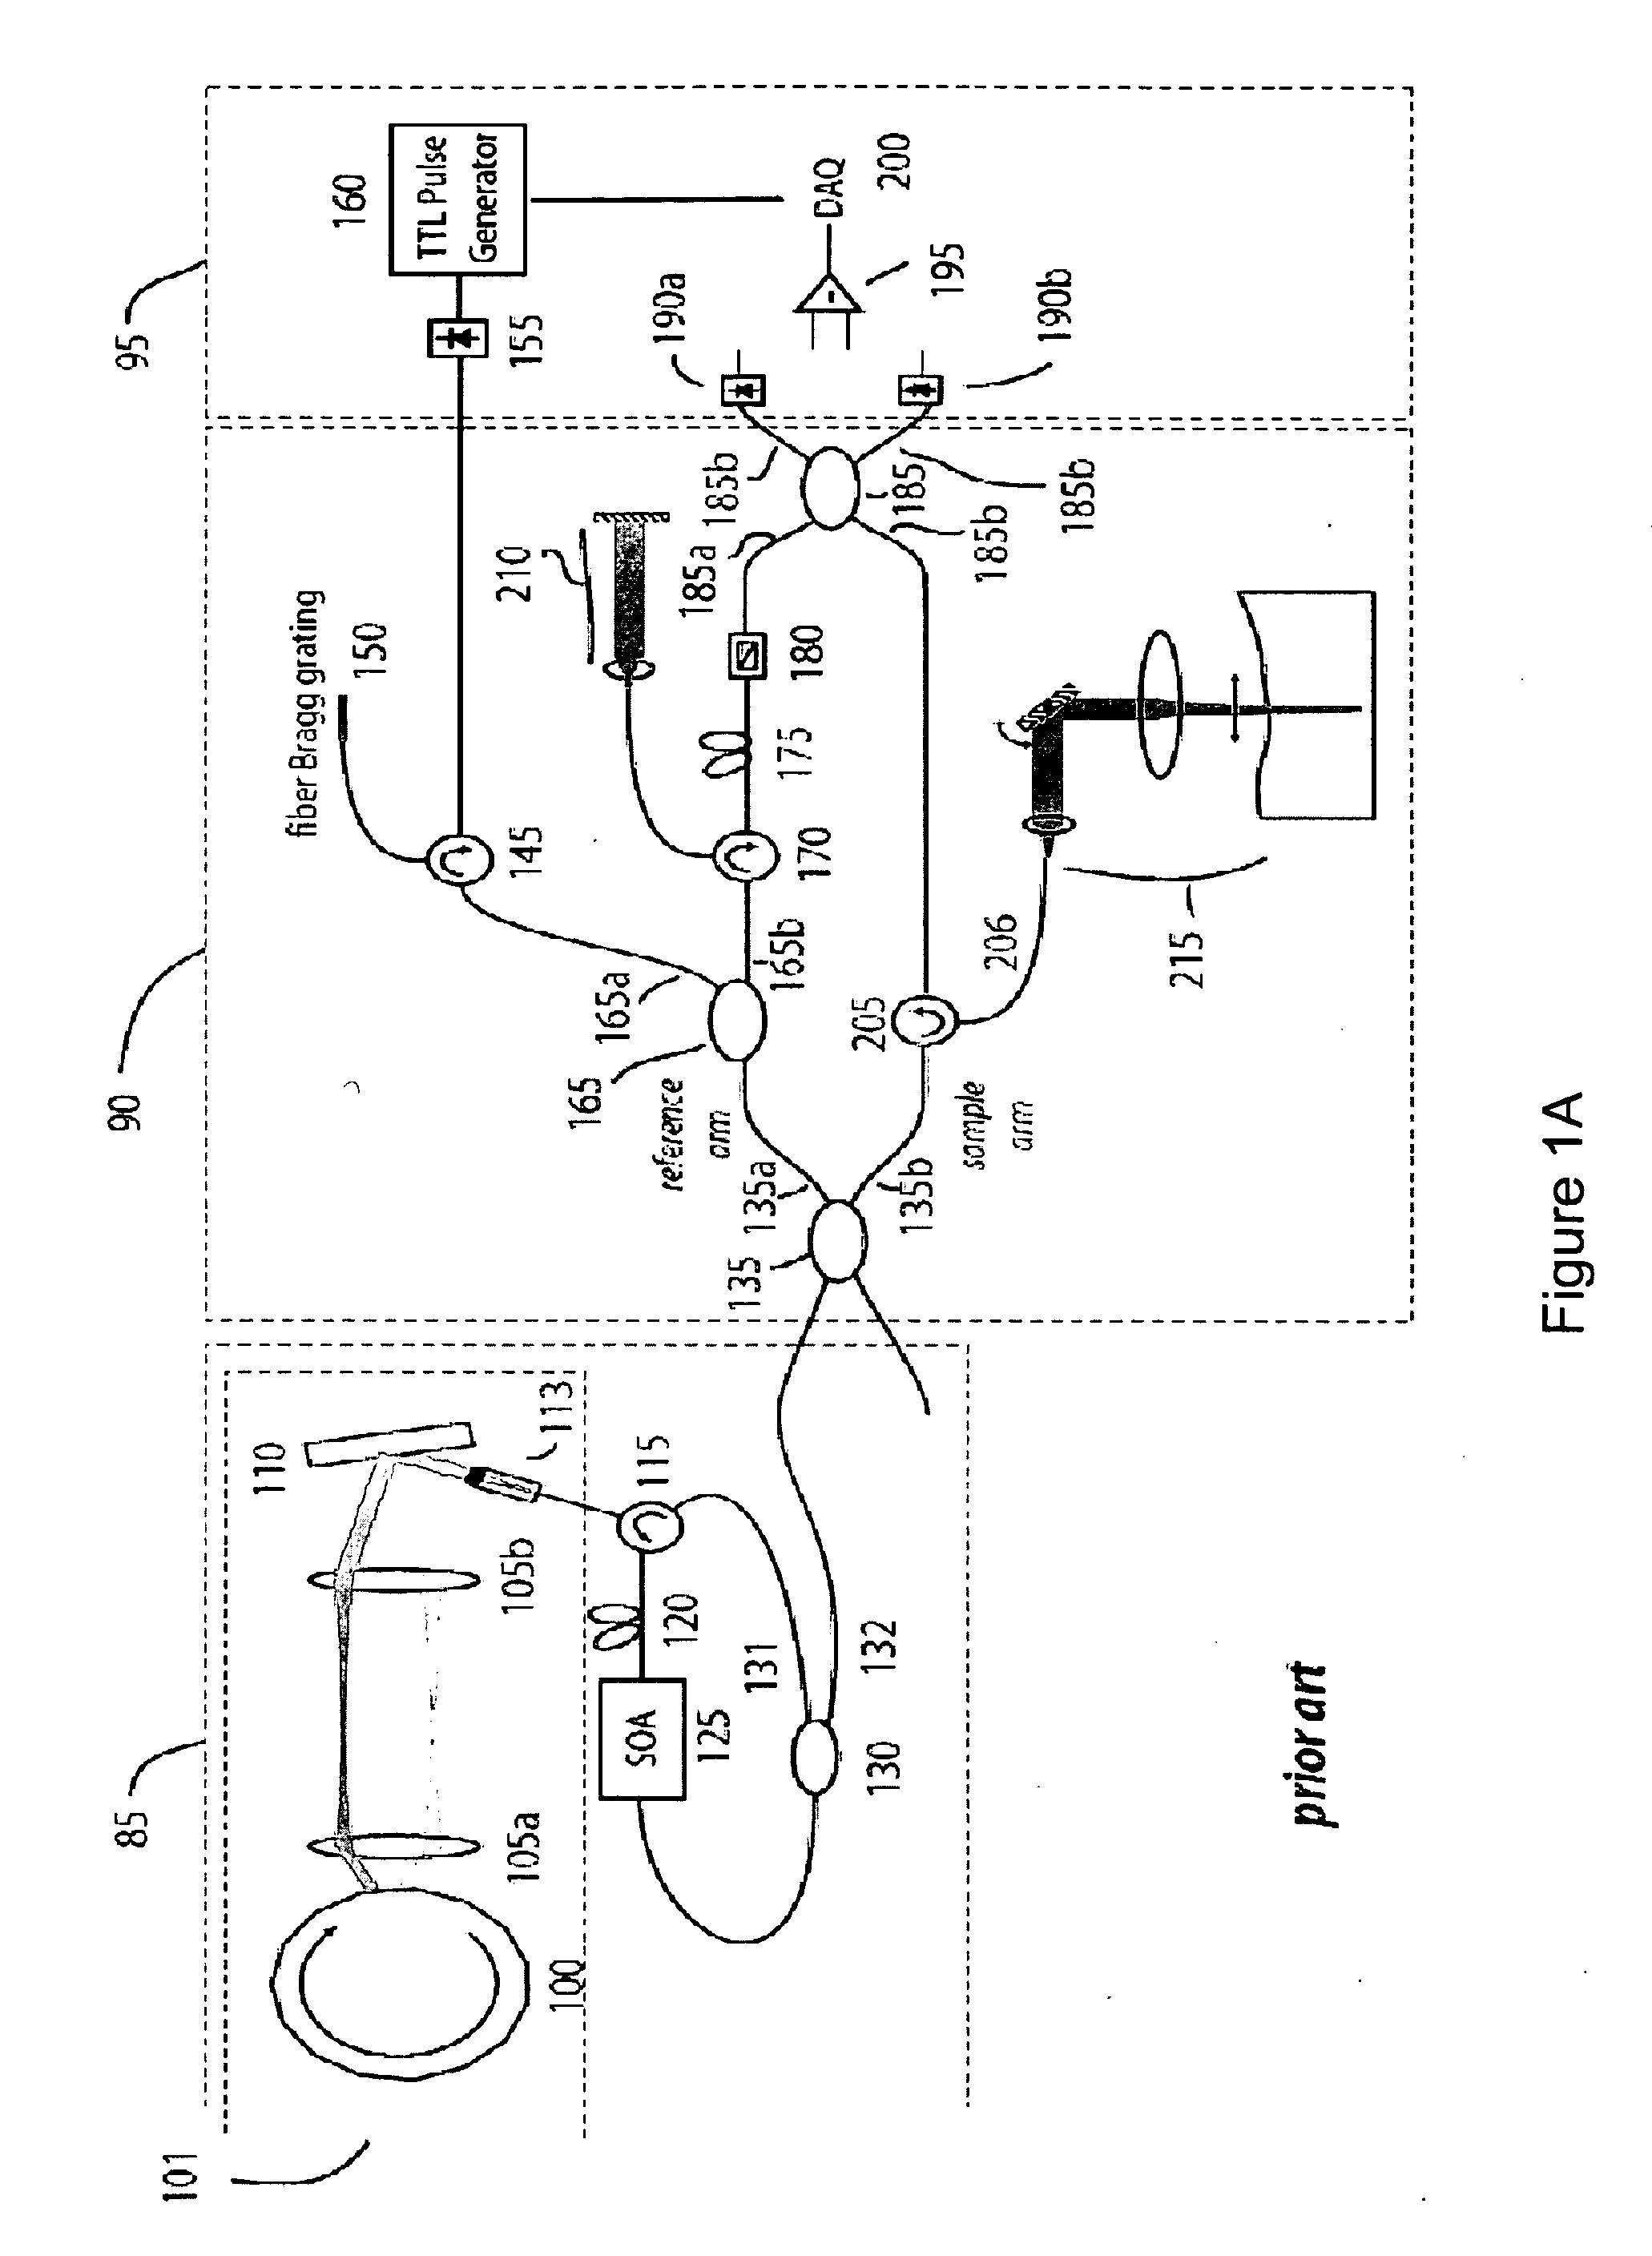 Apparatus, method and system for performing phase-resolved optical frequency domain imaging